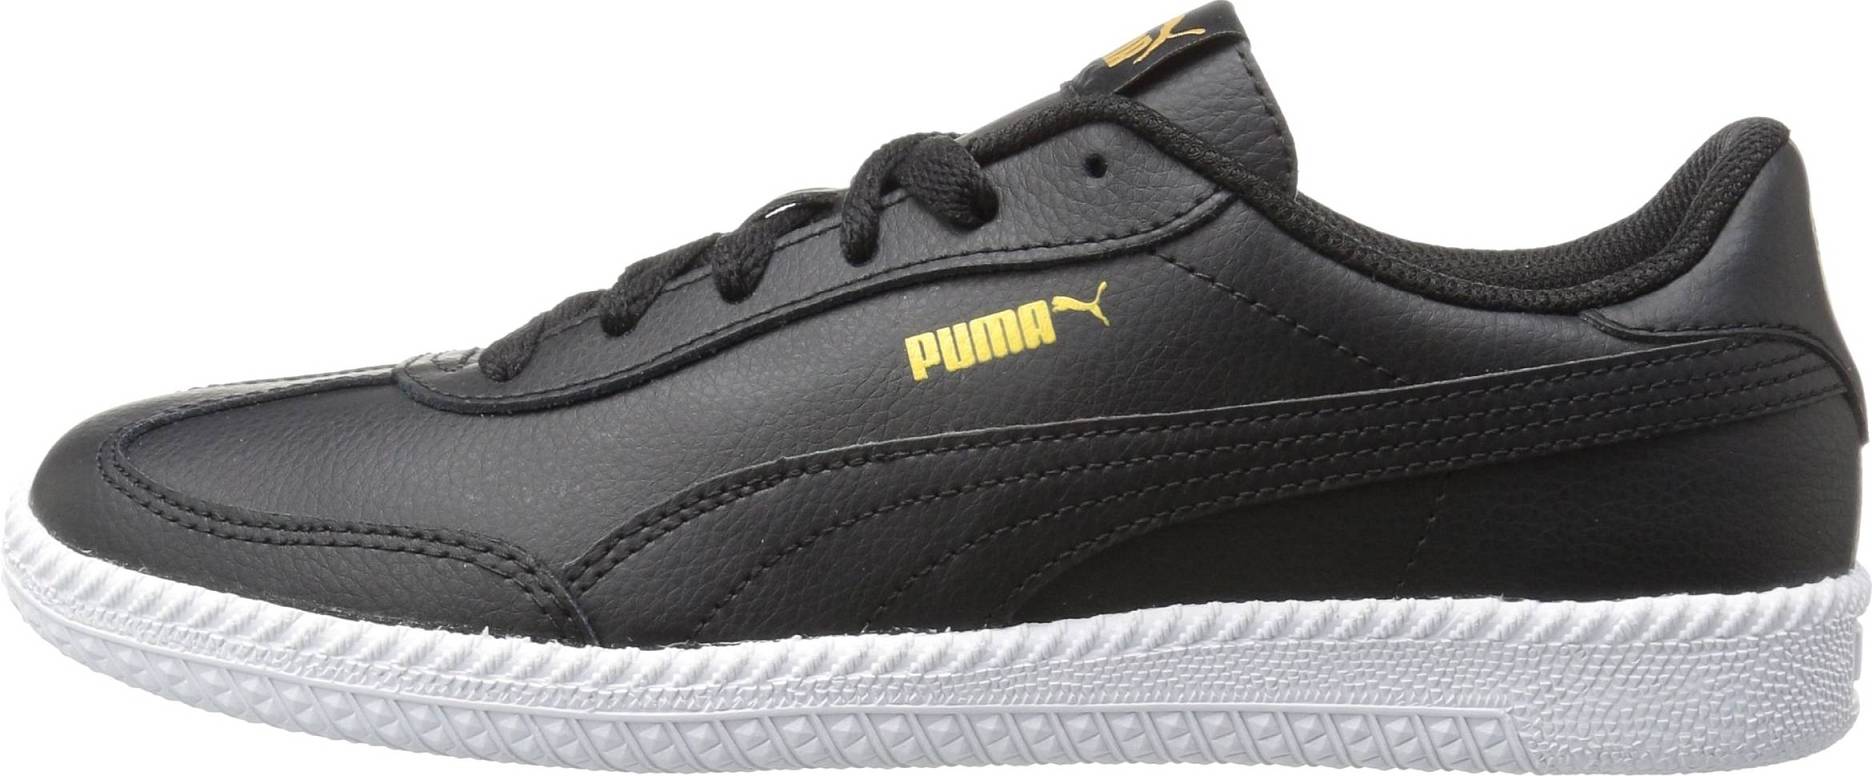 Puma Astro Cup Leather – Shoes Reviews & Reasons To Buy